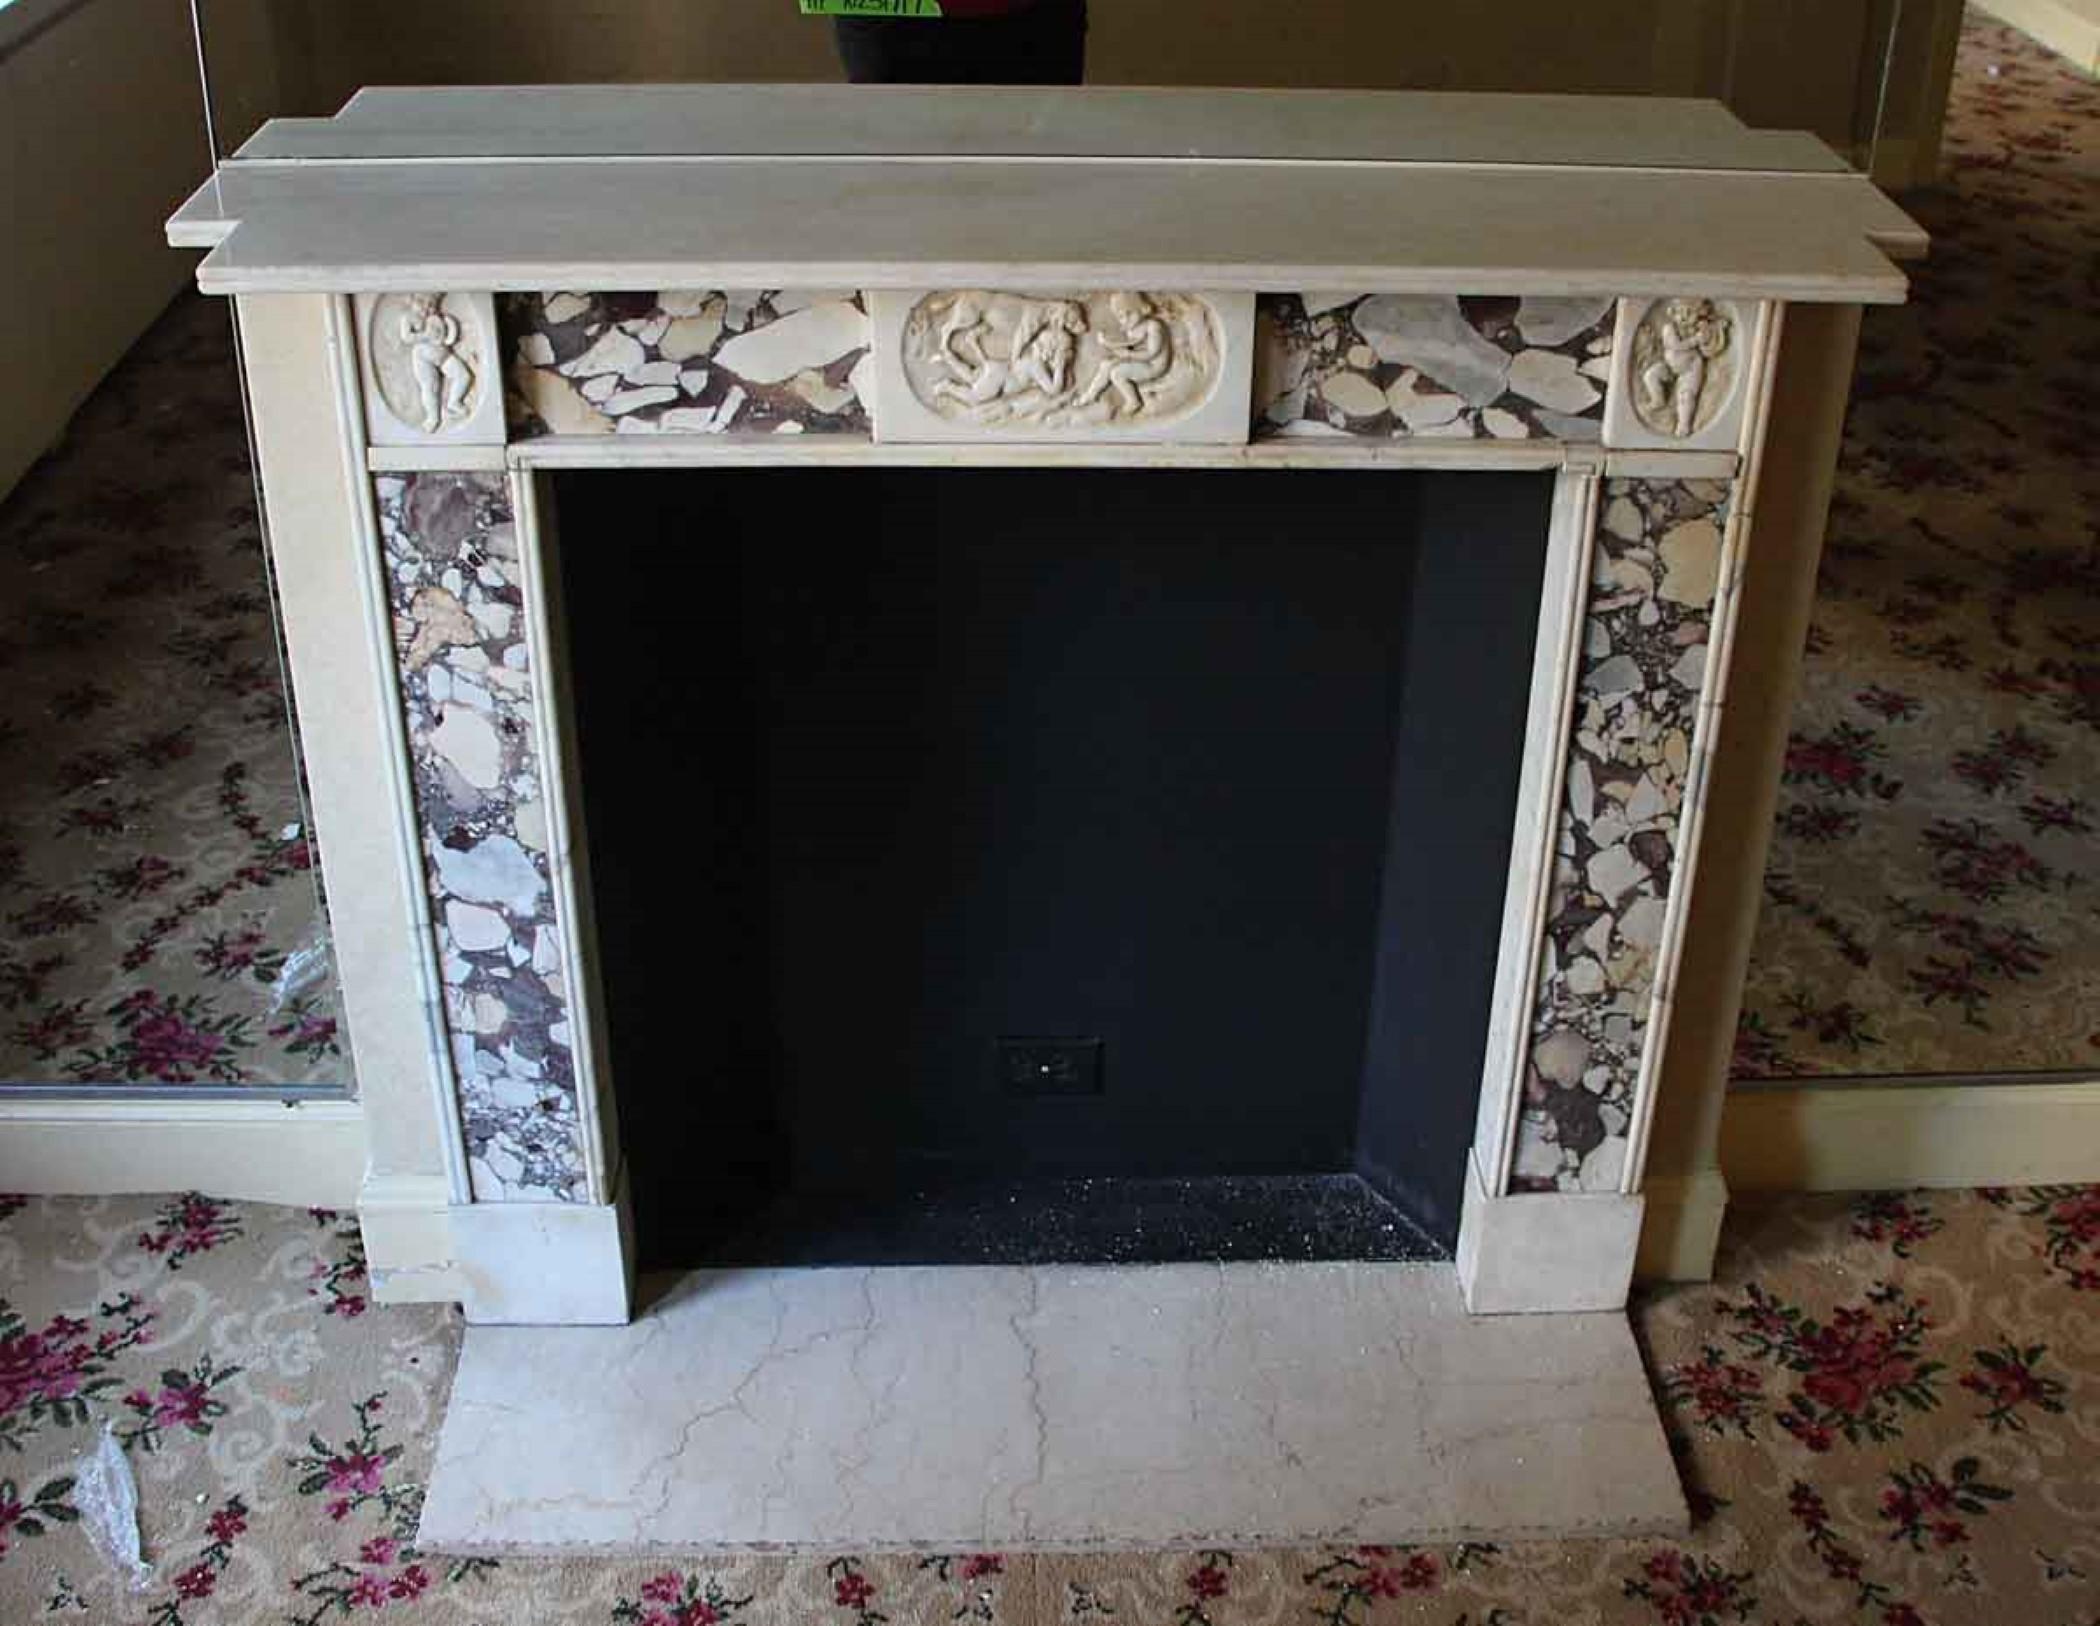 Early 20th century English Regency statuary and violet breche marble mantel. The marble is in good condition with charming details of cherubs playing with a dog and cherubs at each corner. This mantel was one of a group of antique mantels imported